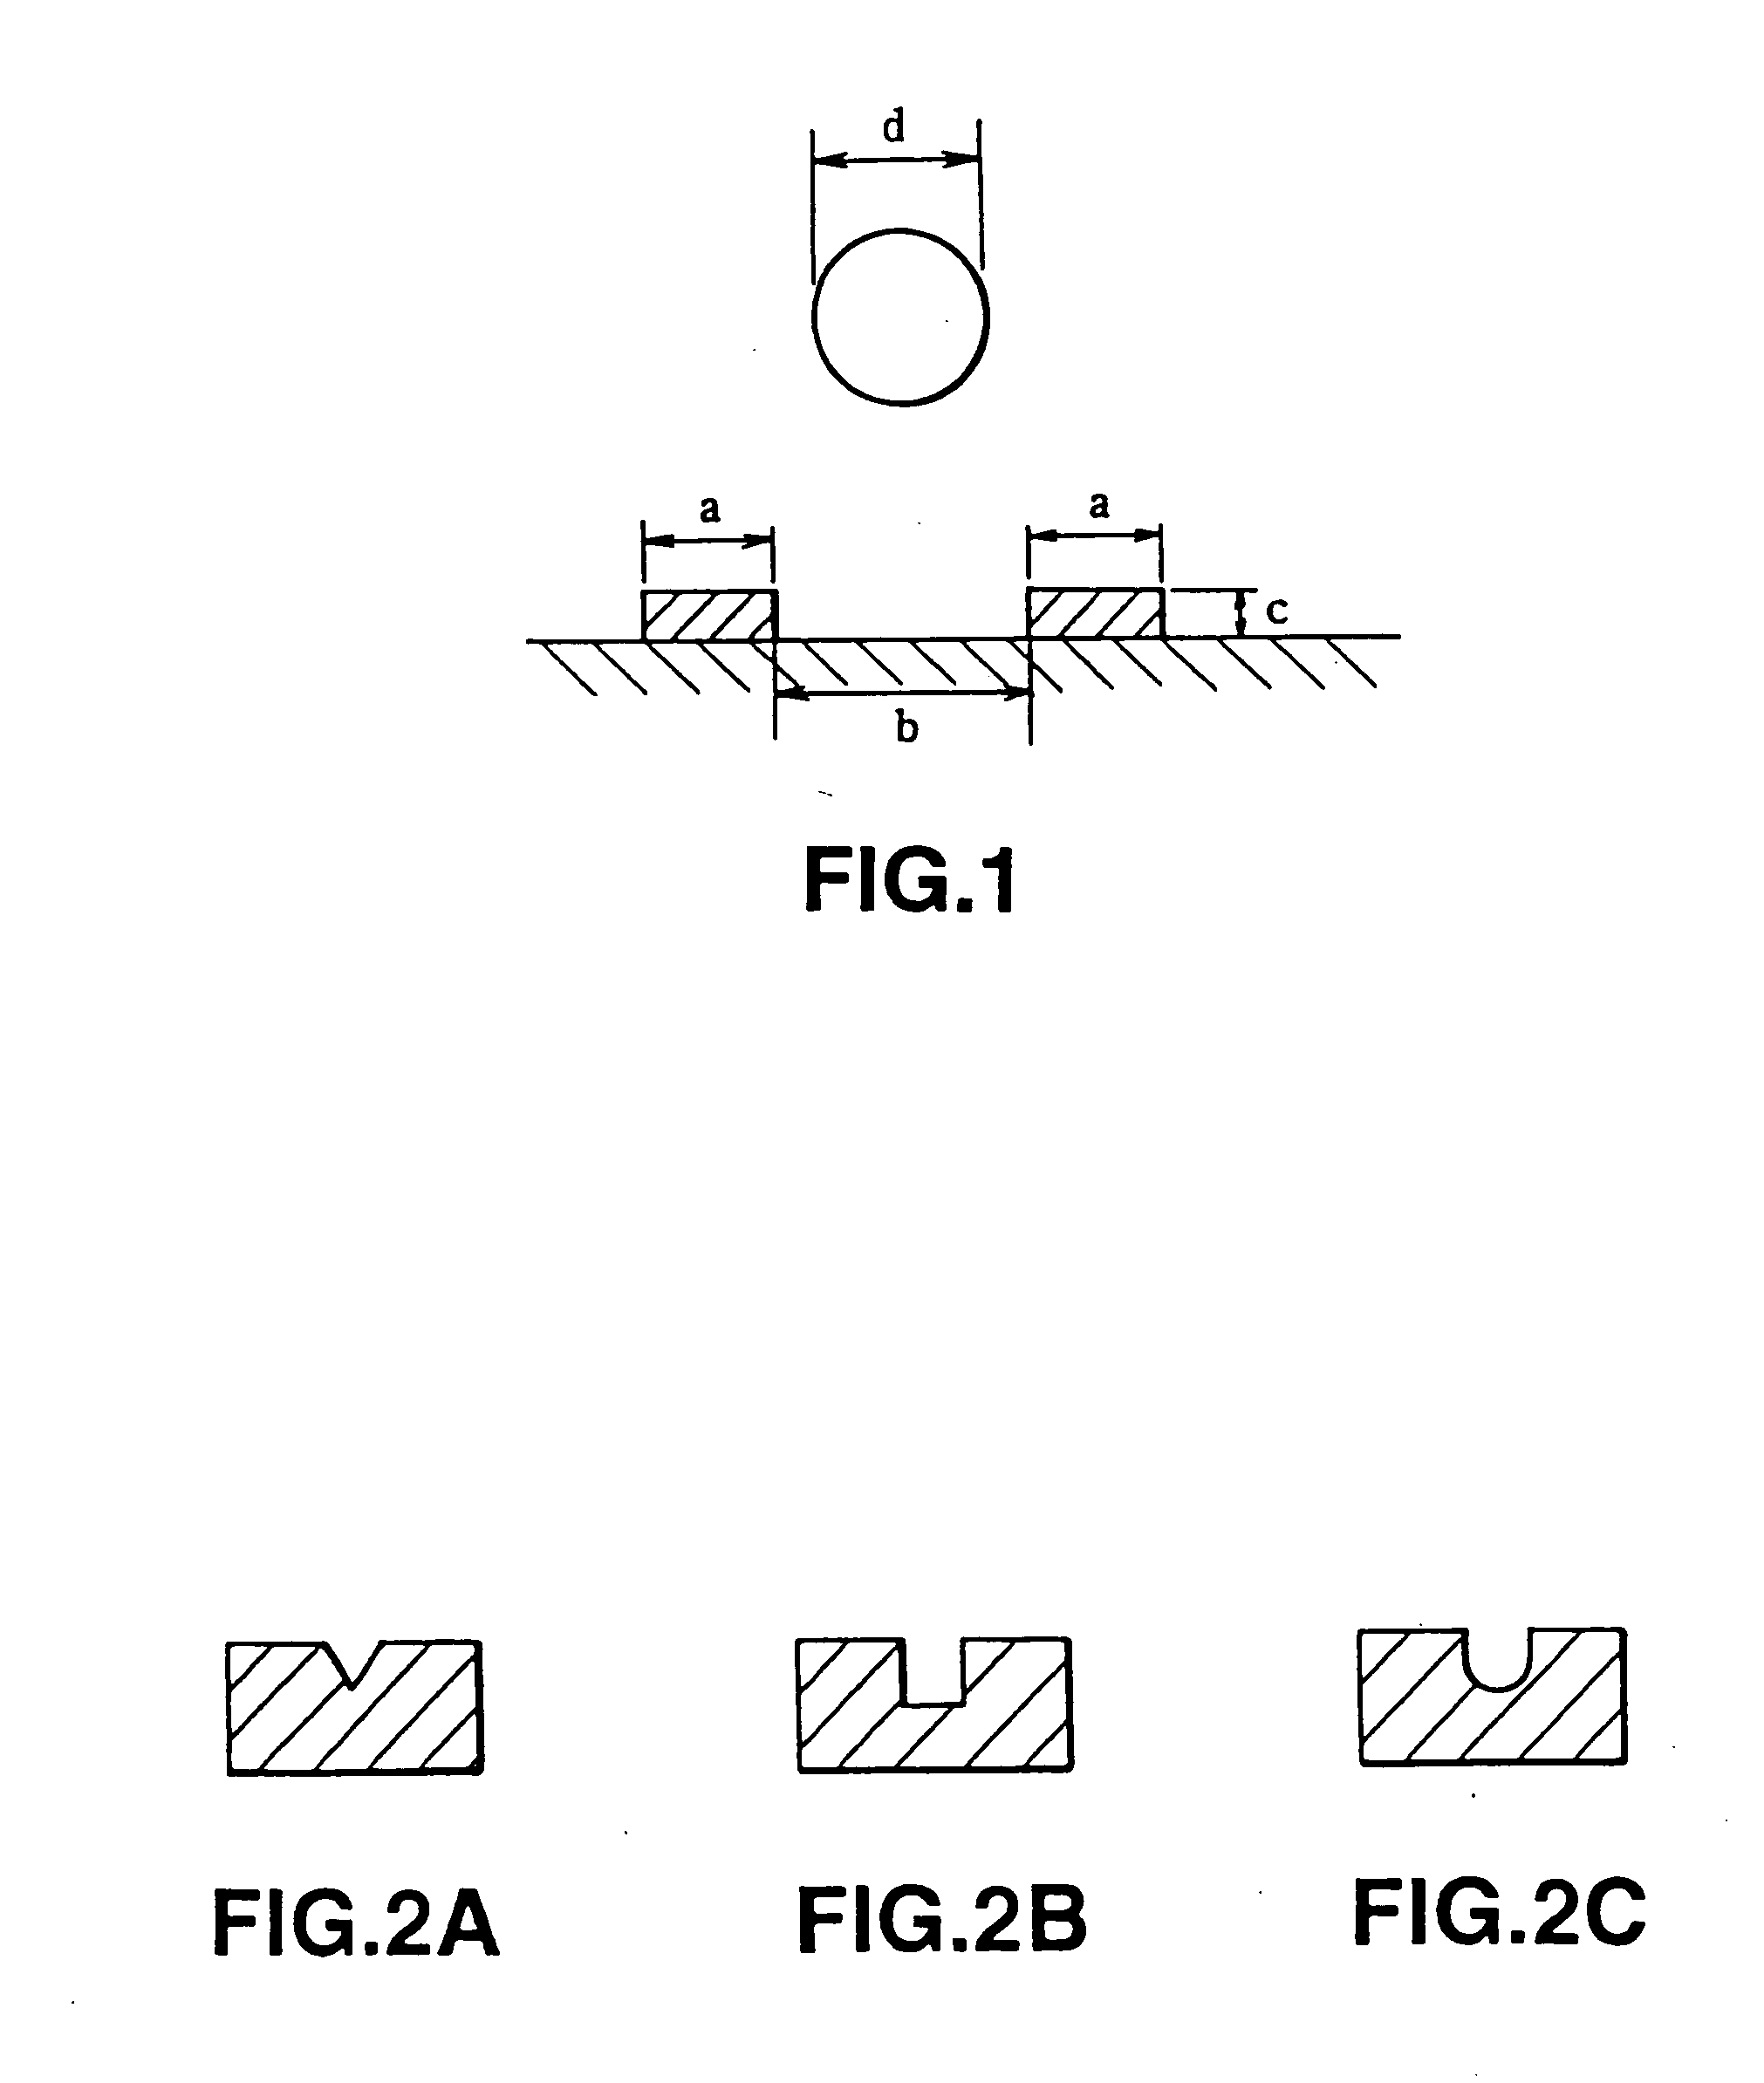 Method of forming thin film patterning substrate including formation of banks